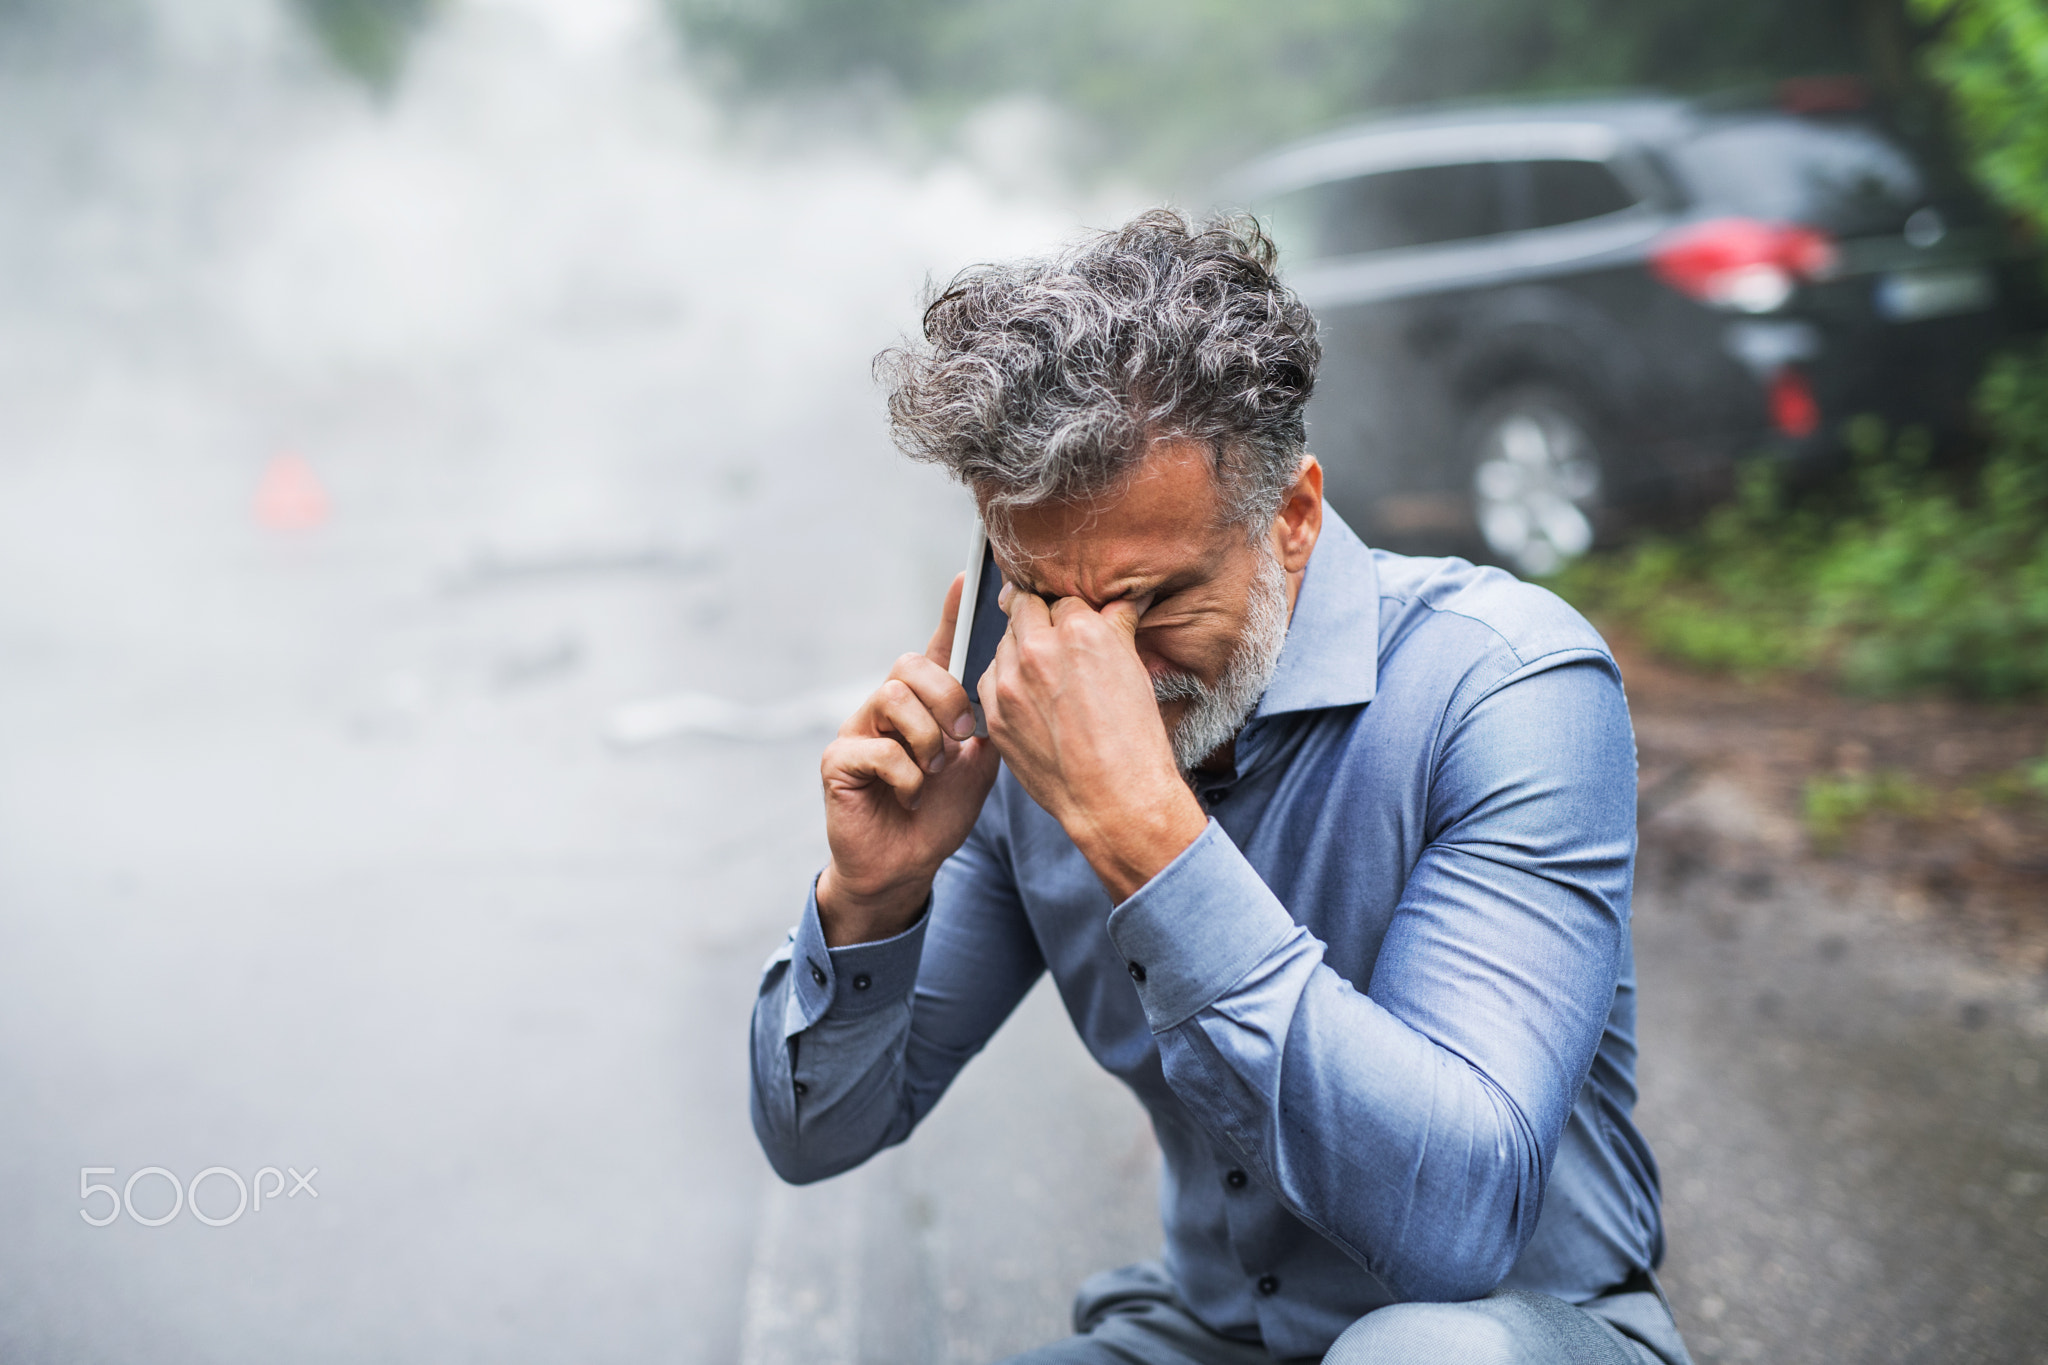 Mature man making a phone call after a car accident, smoke in the background.